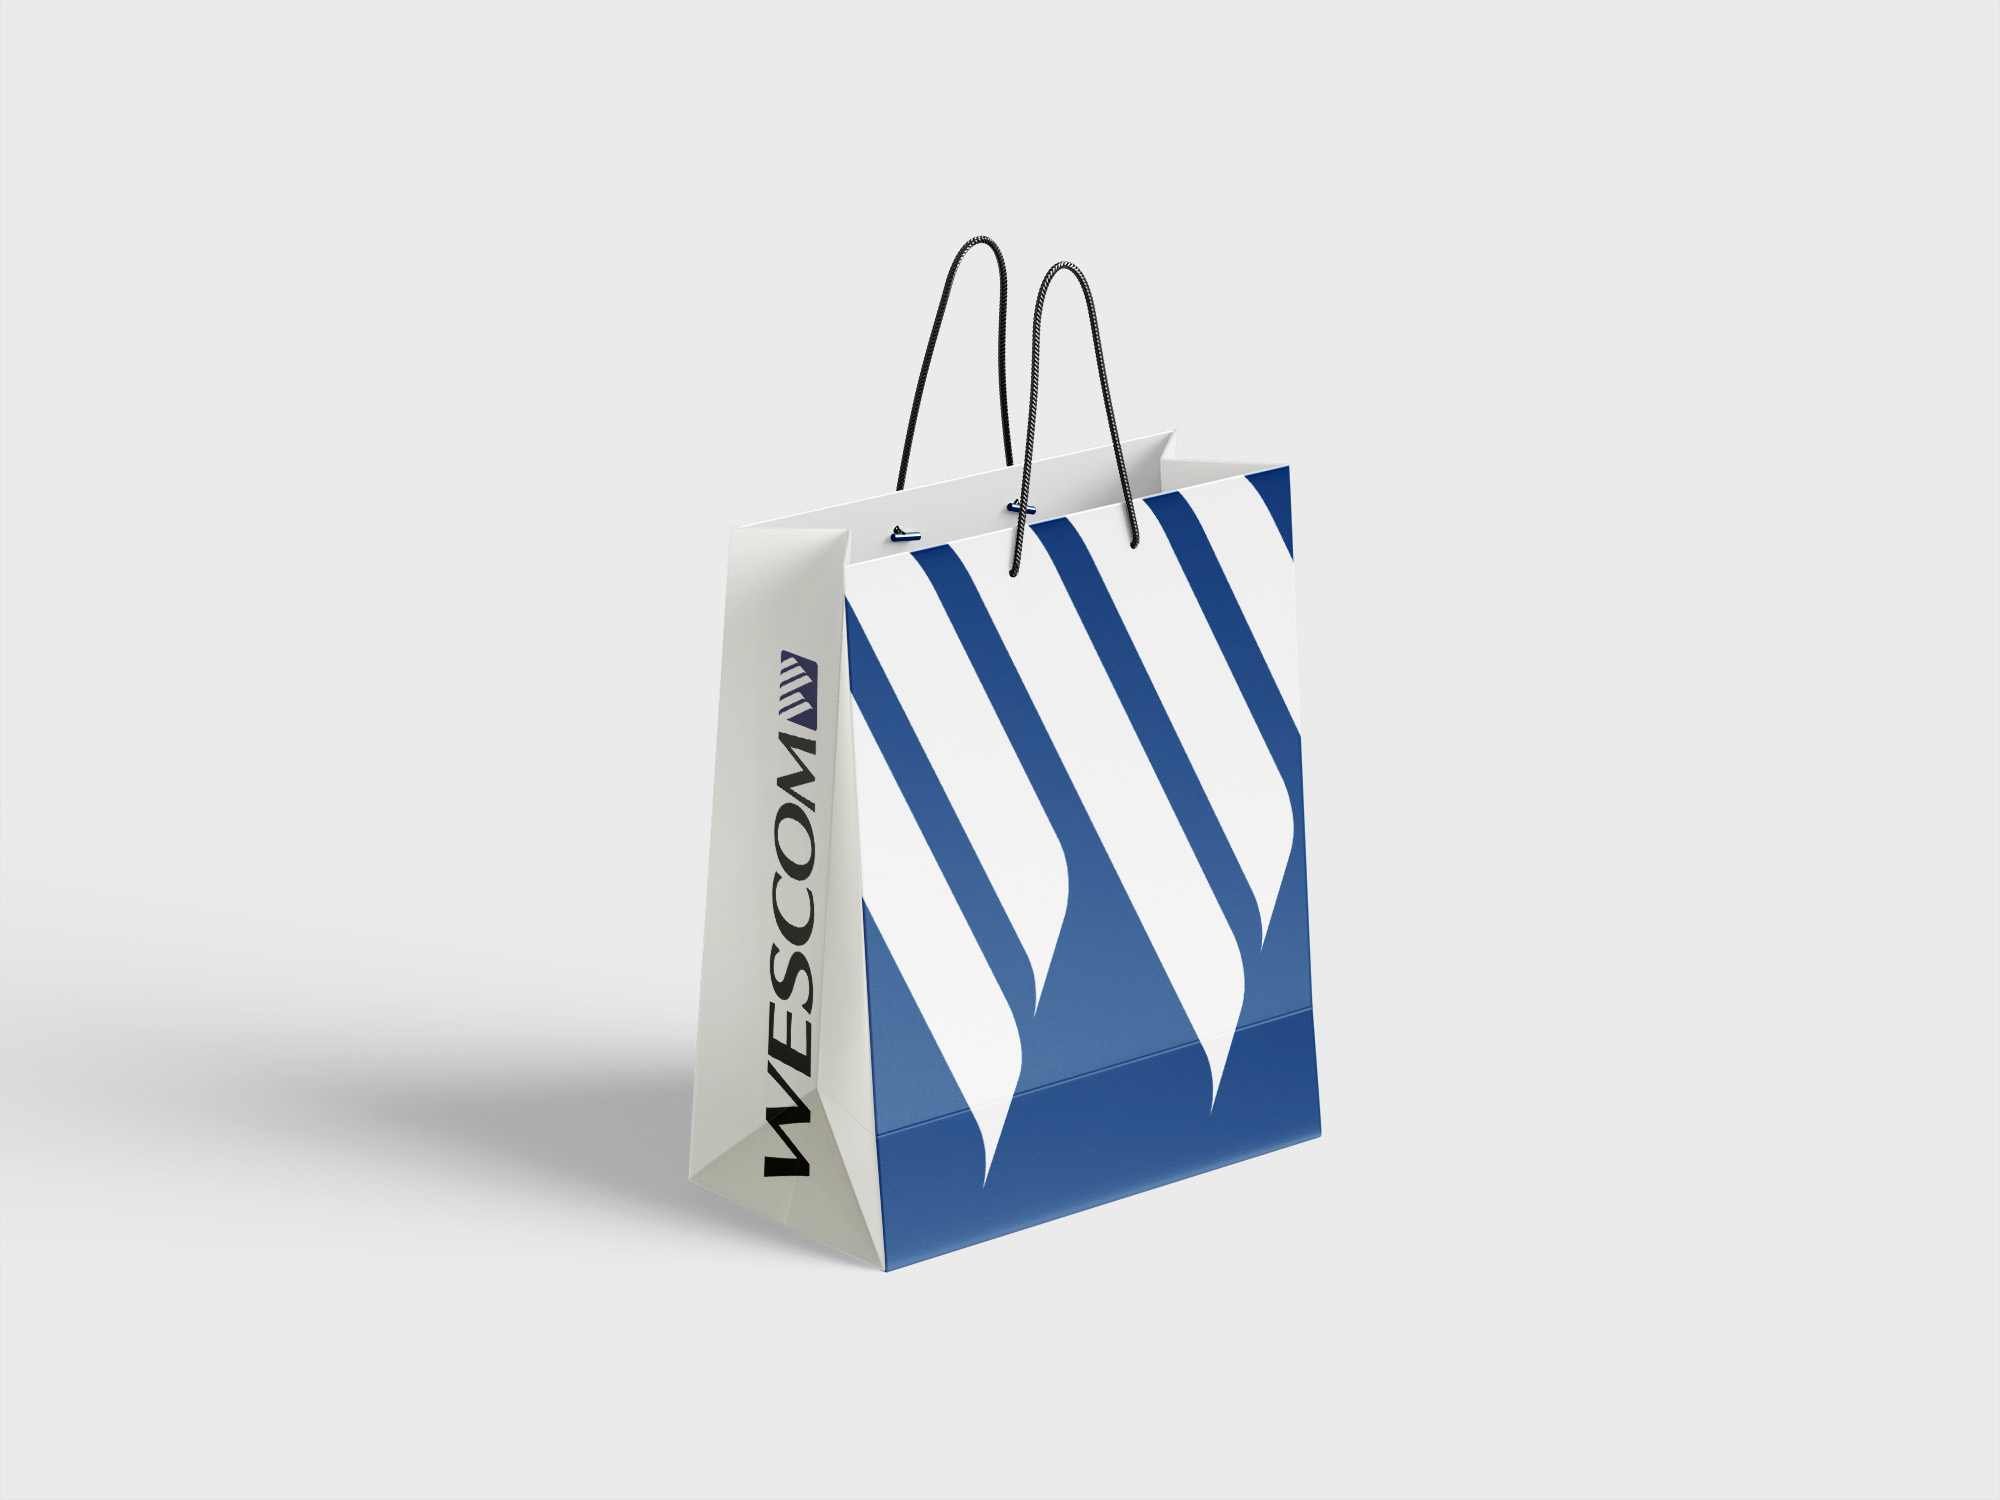 A white and blue bag with a company logo on it.